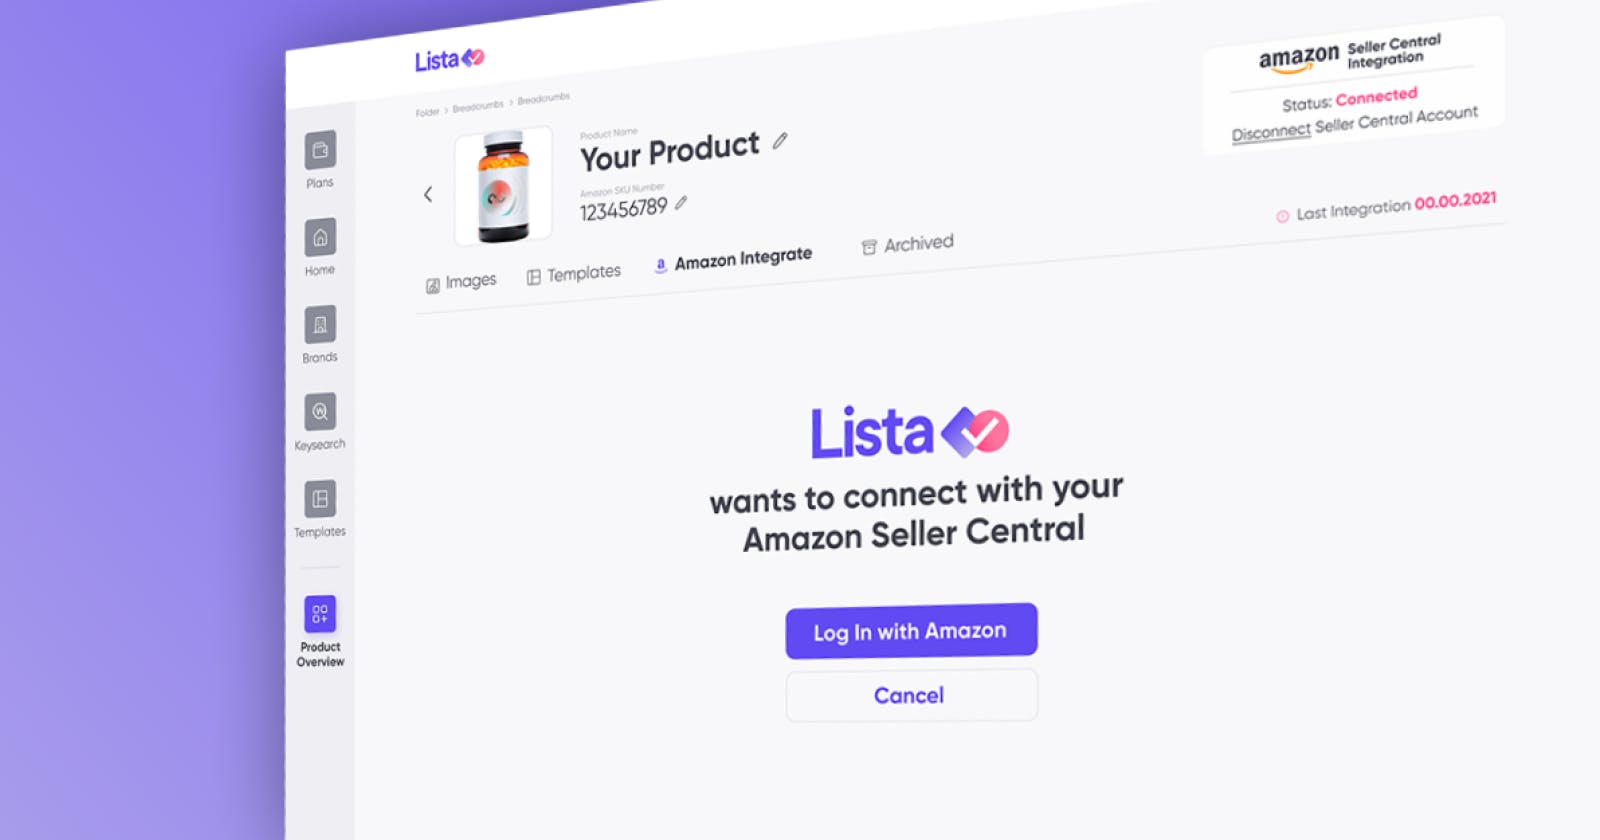 How to integrate with Amazon in Lista